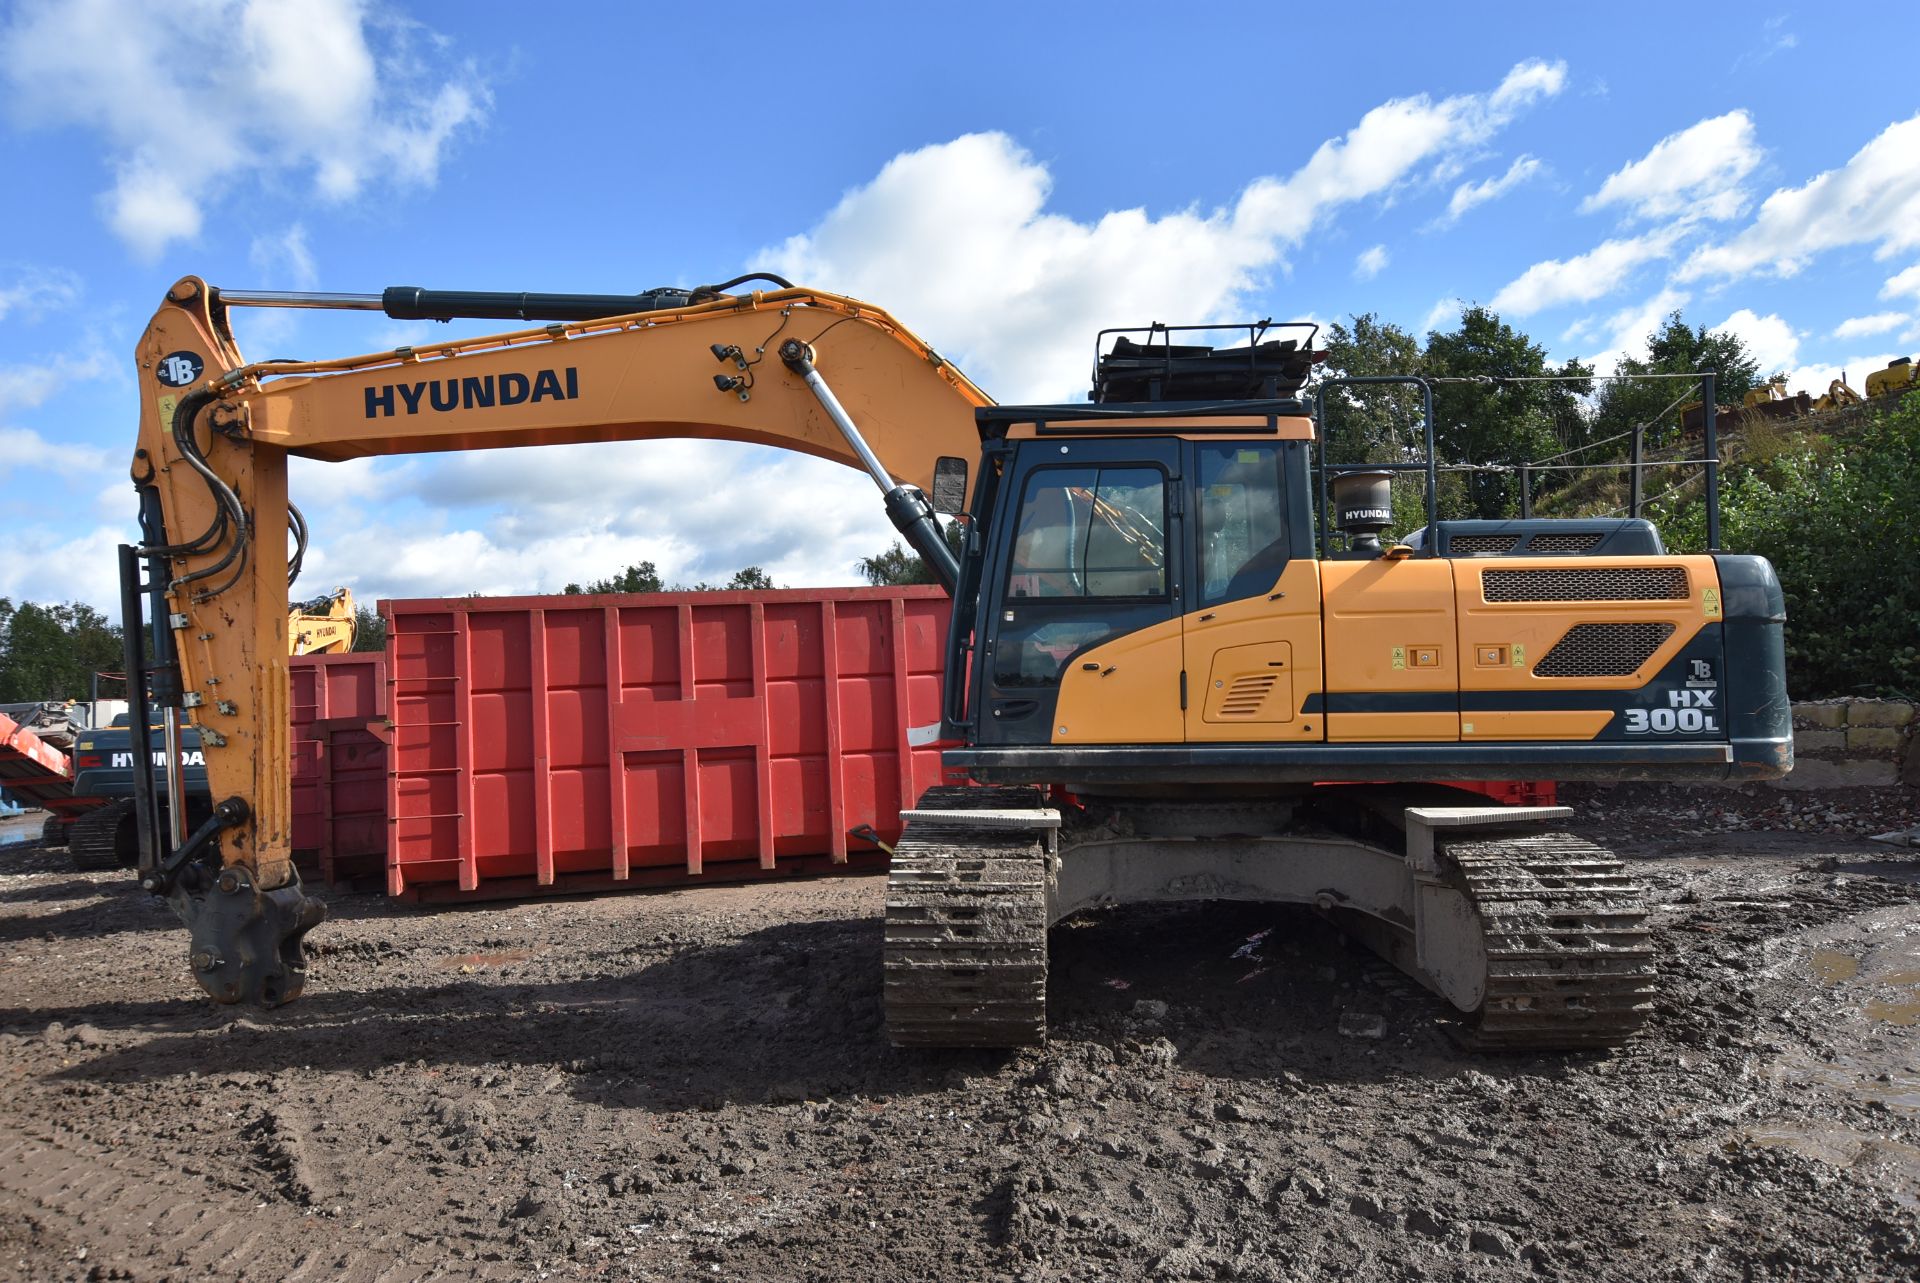 Hyundai HX300L 30T TRACKED EXCAVATOR, VIN HHKHK801TH0000492, year of manufacture 2017, indicated